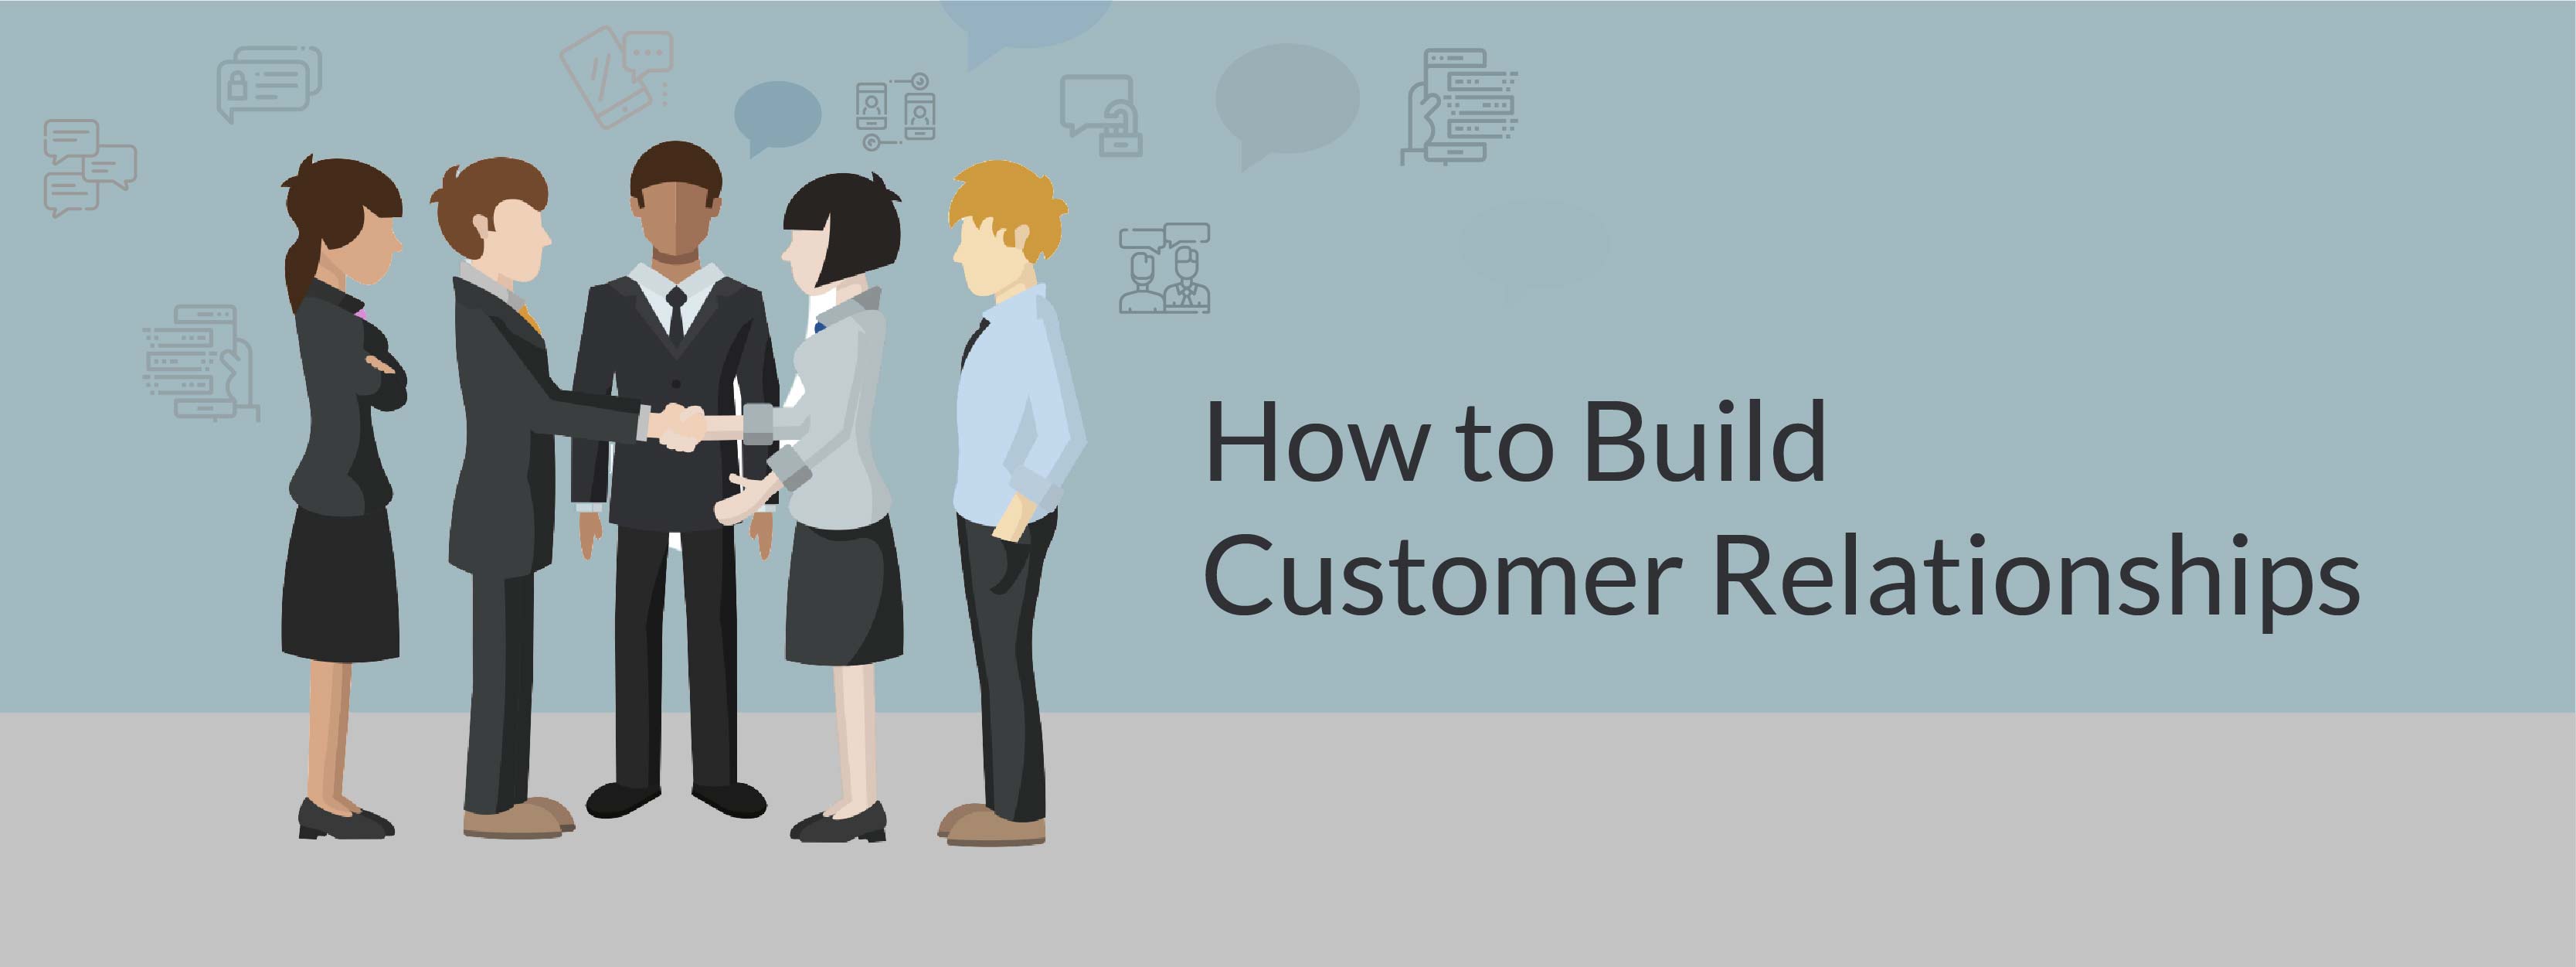 10 Proven Ways to Build Life Long Customer Relationships (and Why it's